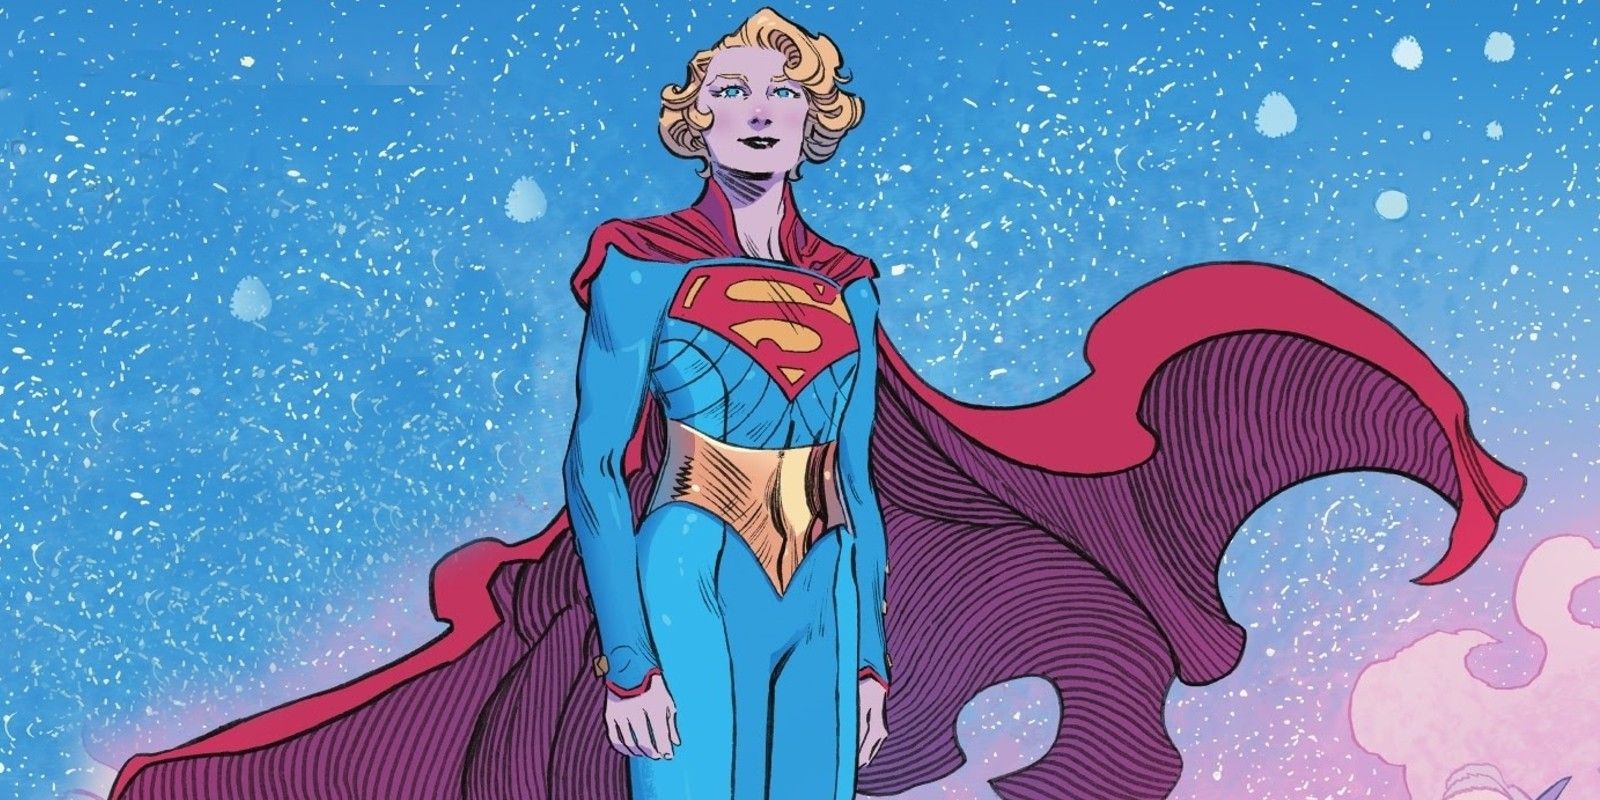 Supergirl flying in the sky in the DC comics